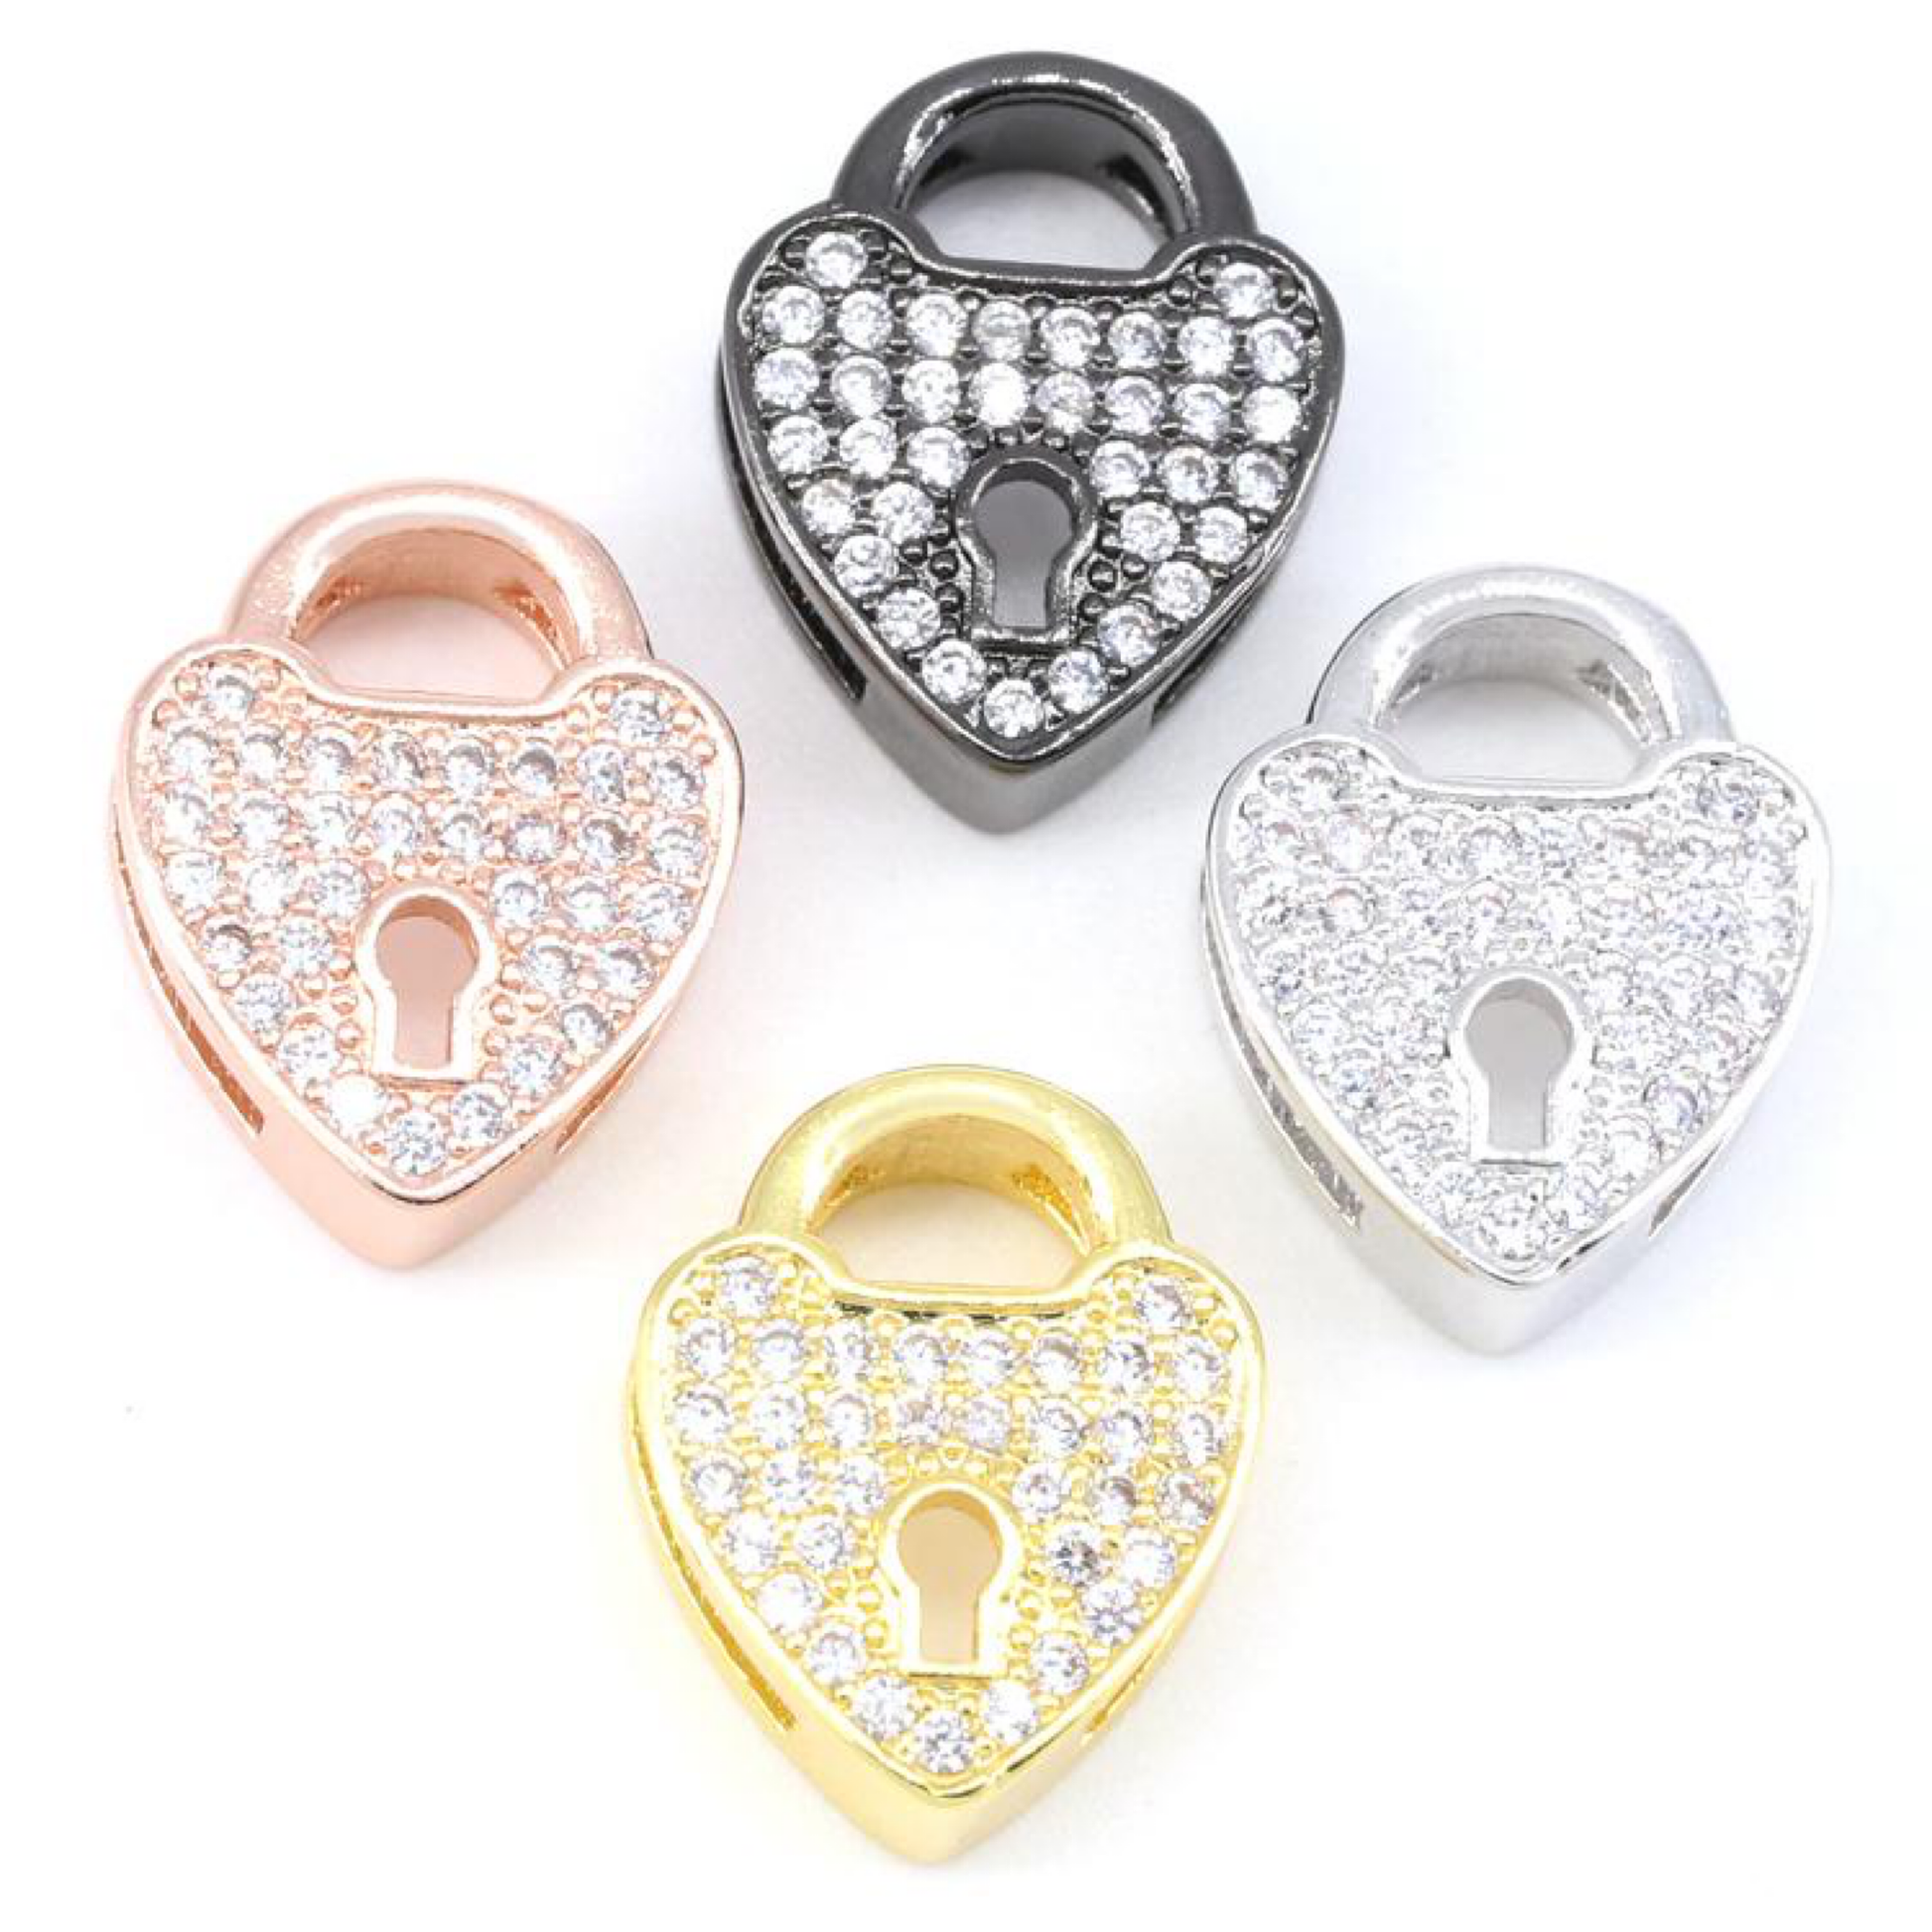 HEART LOCK CHARMS LIFE COLLECTION (4632172429387)